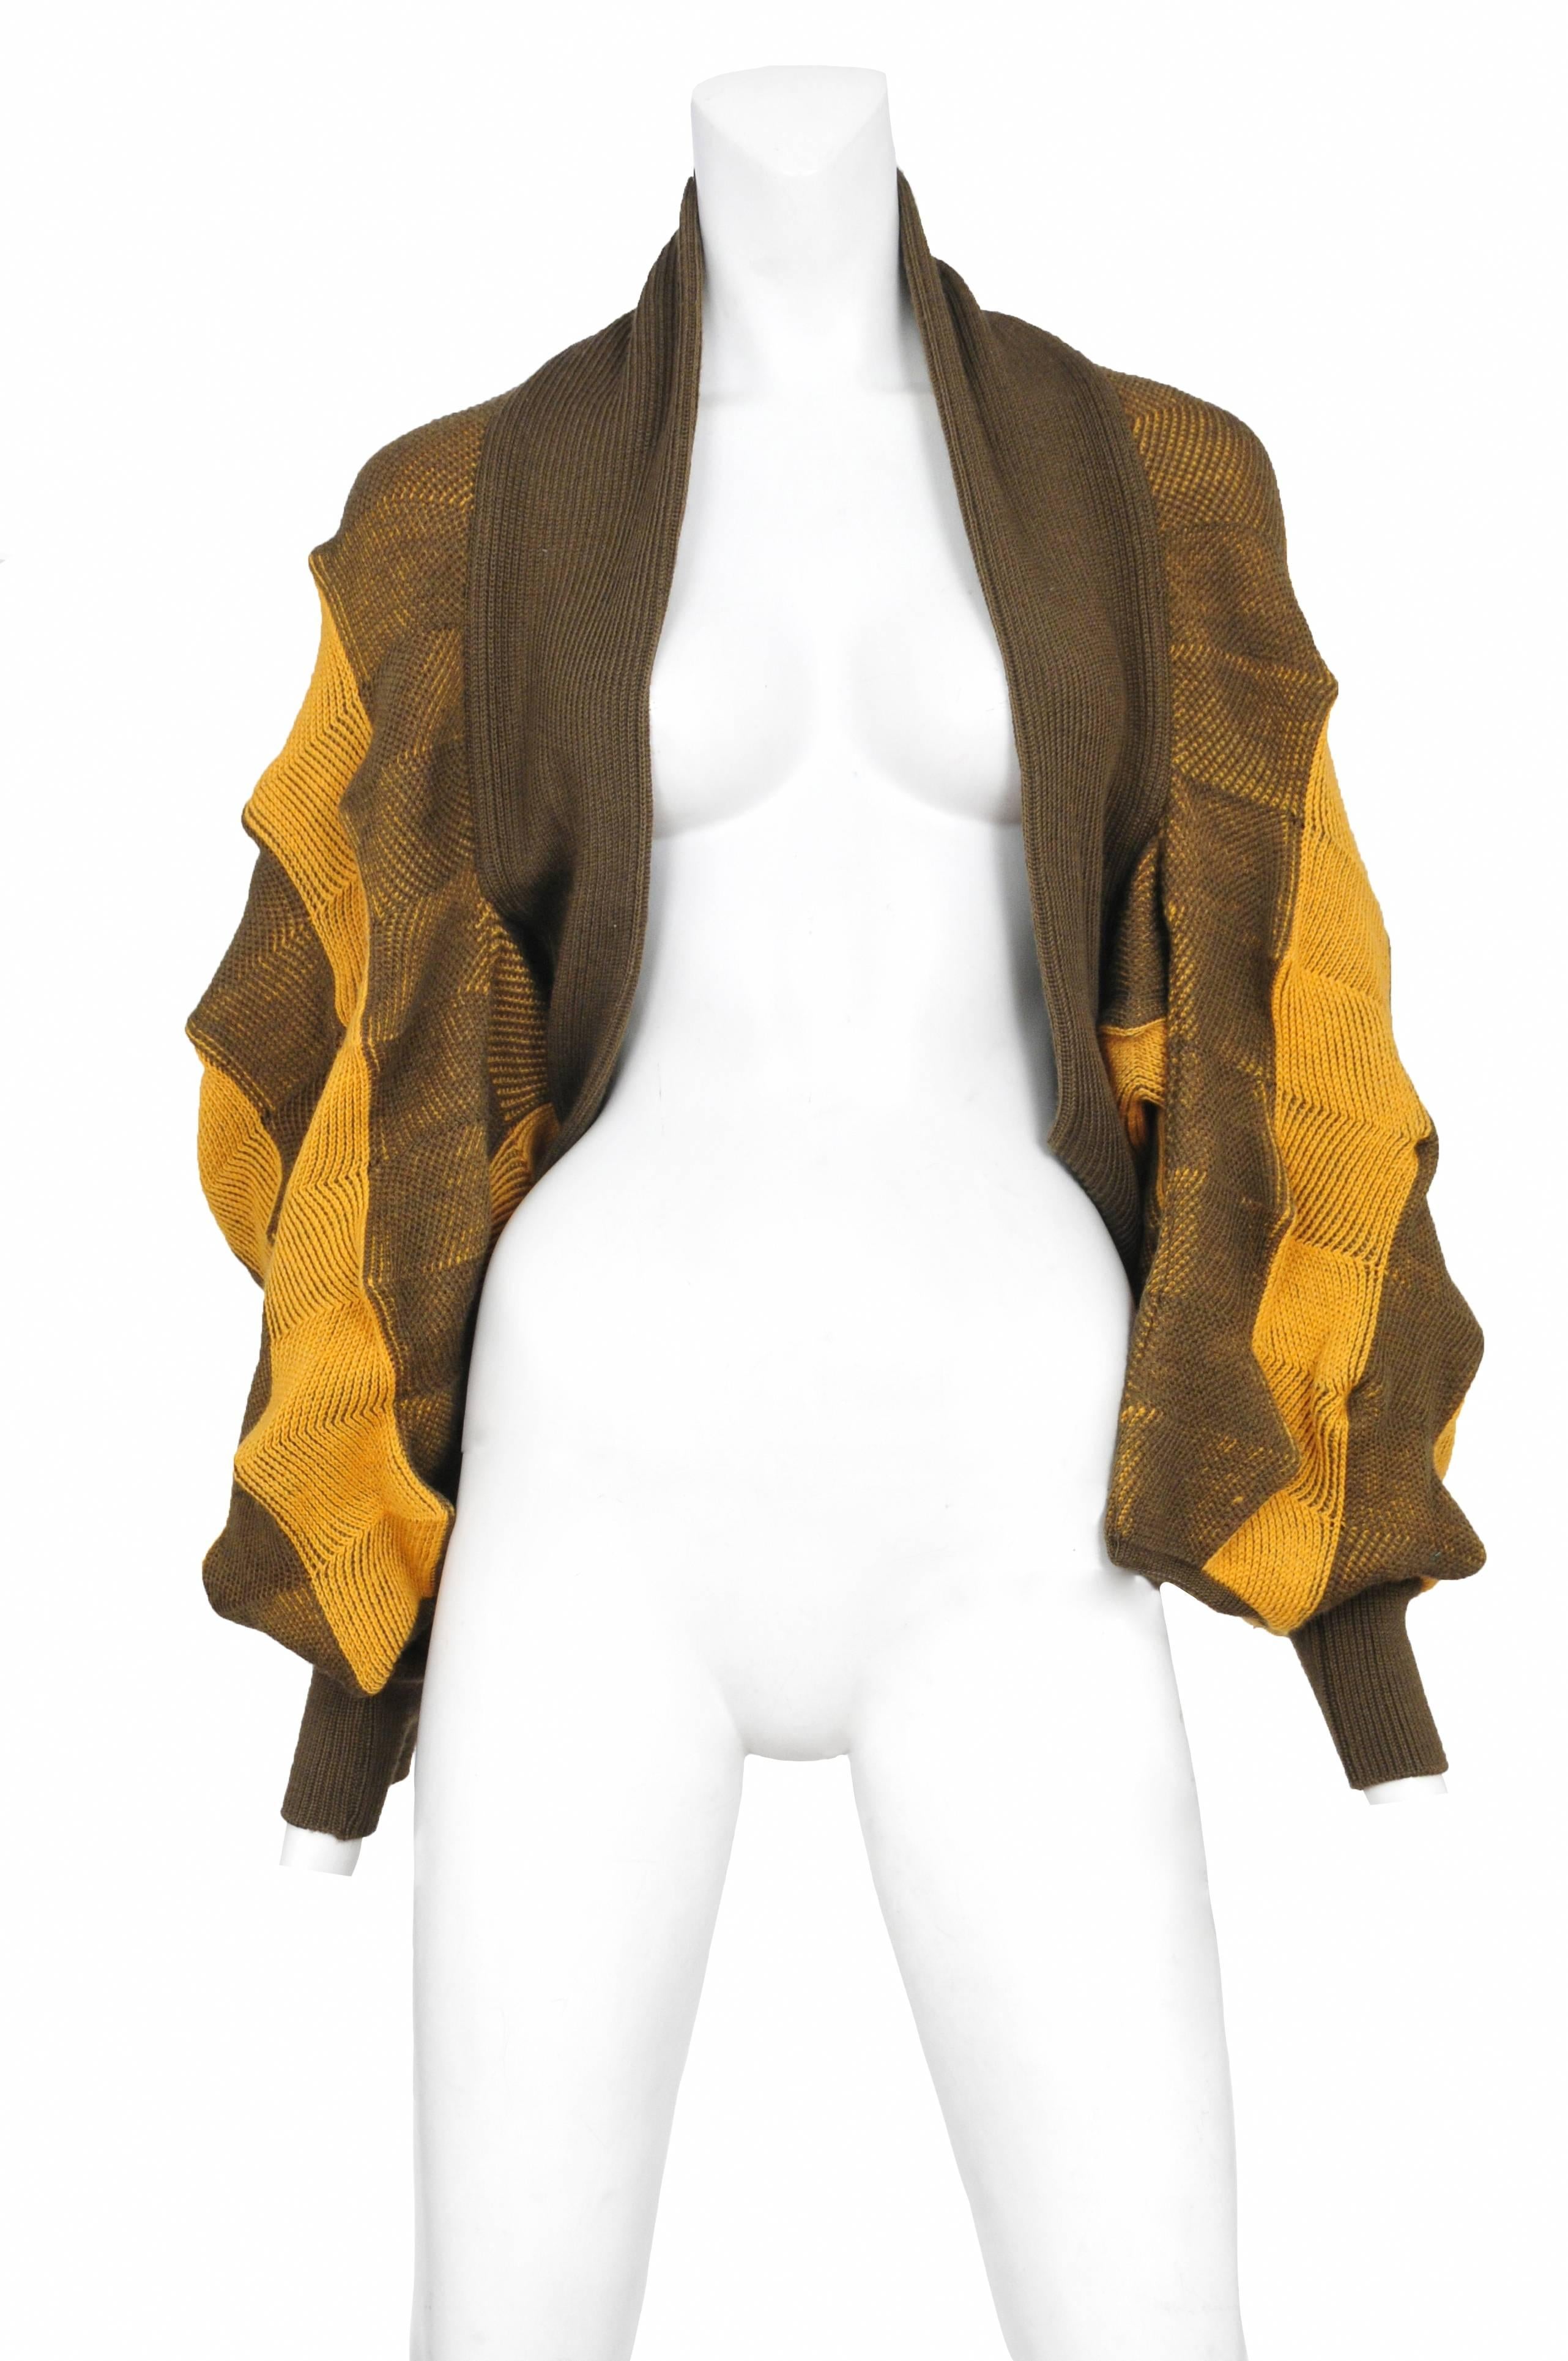 Vintage Issey Miyake wool shrug featuring an all over yellow and olive stripe 3D chevron textile design.
Please inquire for additional images.